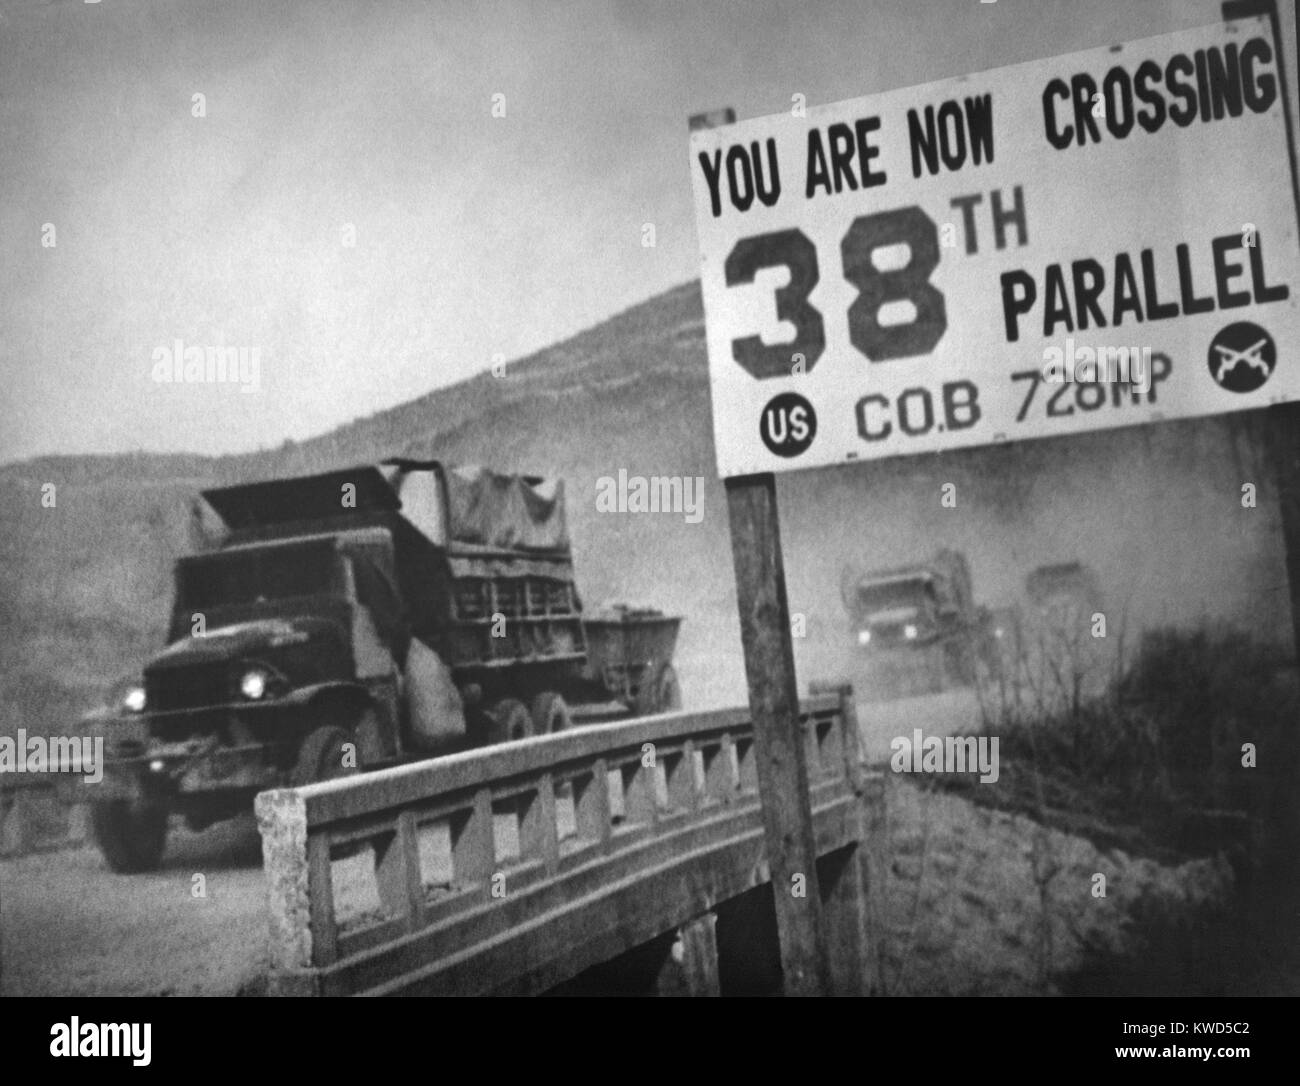 United Nations forces withdrawing southbound from Pyongyang, again cross the 38th parallel into South Korea. UN forces saw hard fighting with the 'Peoples Volunteer Army' at Ch'osan, Unsan, and Tokch'on in early Nov. 1950. On Dec. 5, 1950, the U.S. Eighth Army withdrew south of P'yongyang and was below the 38th parallel by mid-December. Korean War, 1950-53. (BSLOC 2014 11 68) Stock Photo